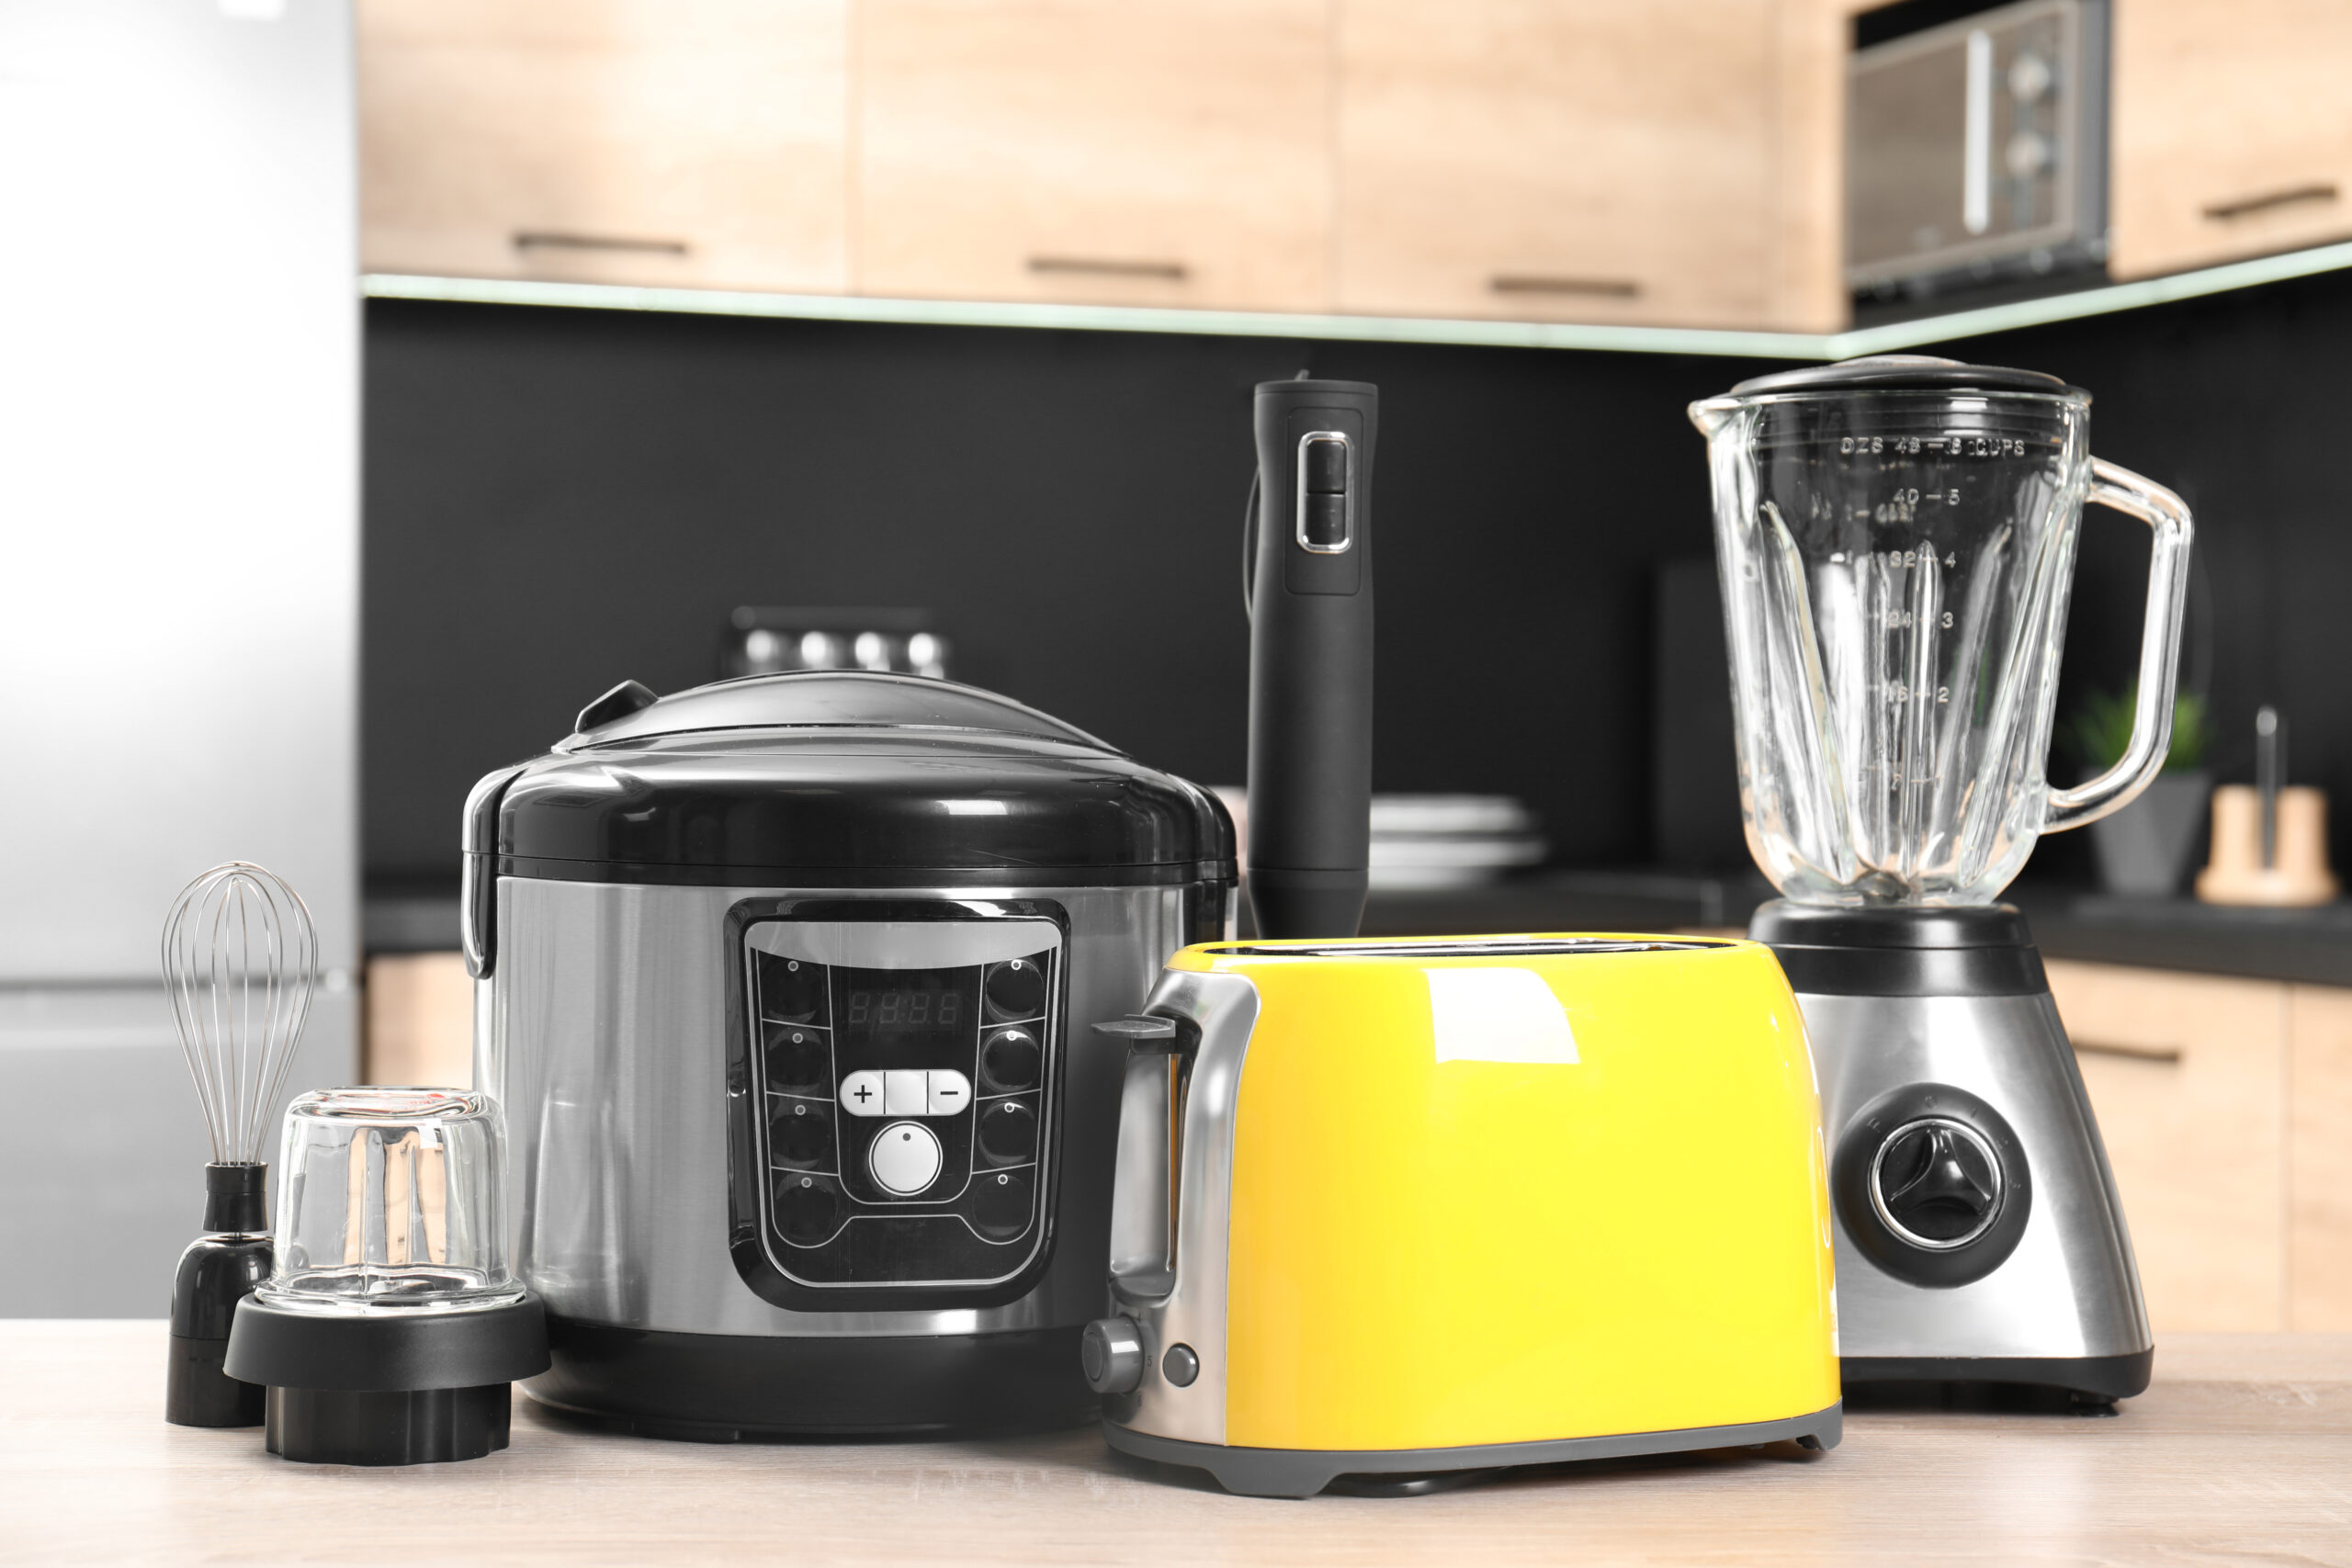 10 Essential Appliances for Sale When Moving Into Your First Home